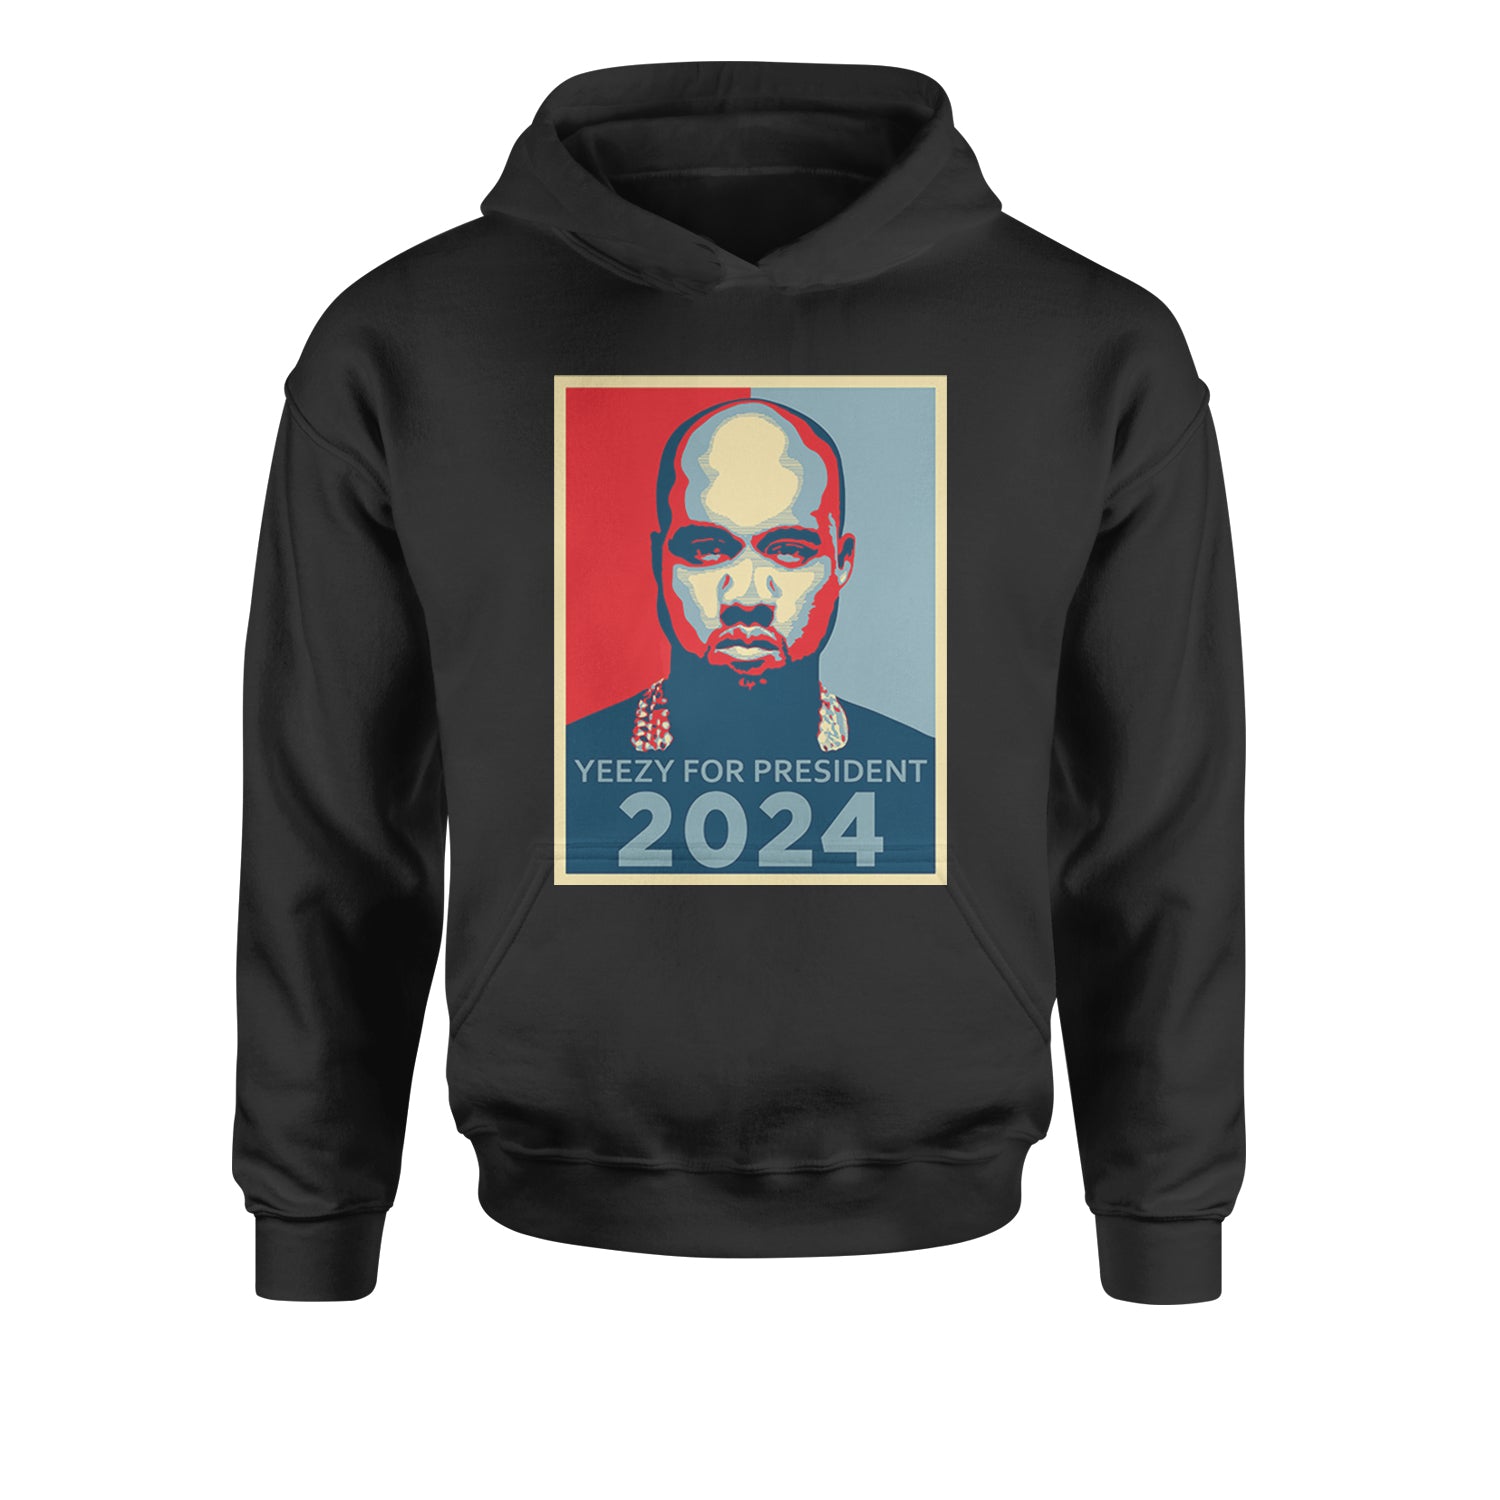 Yeezus For President Vote for Ye Youth-Sized Hoodie Black